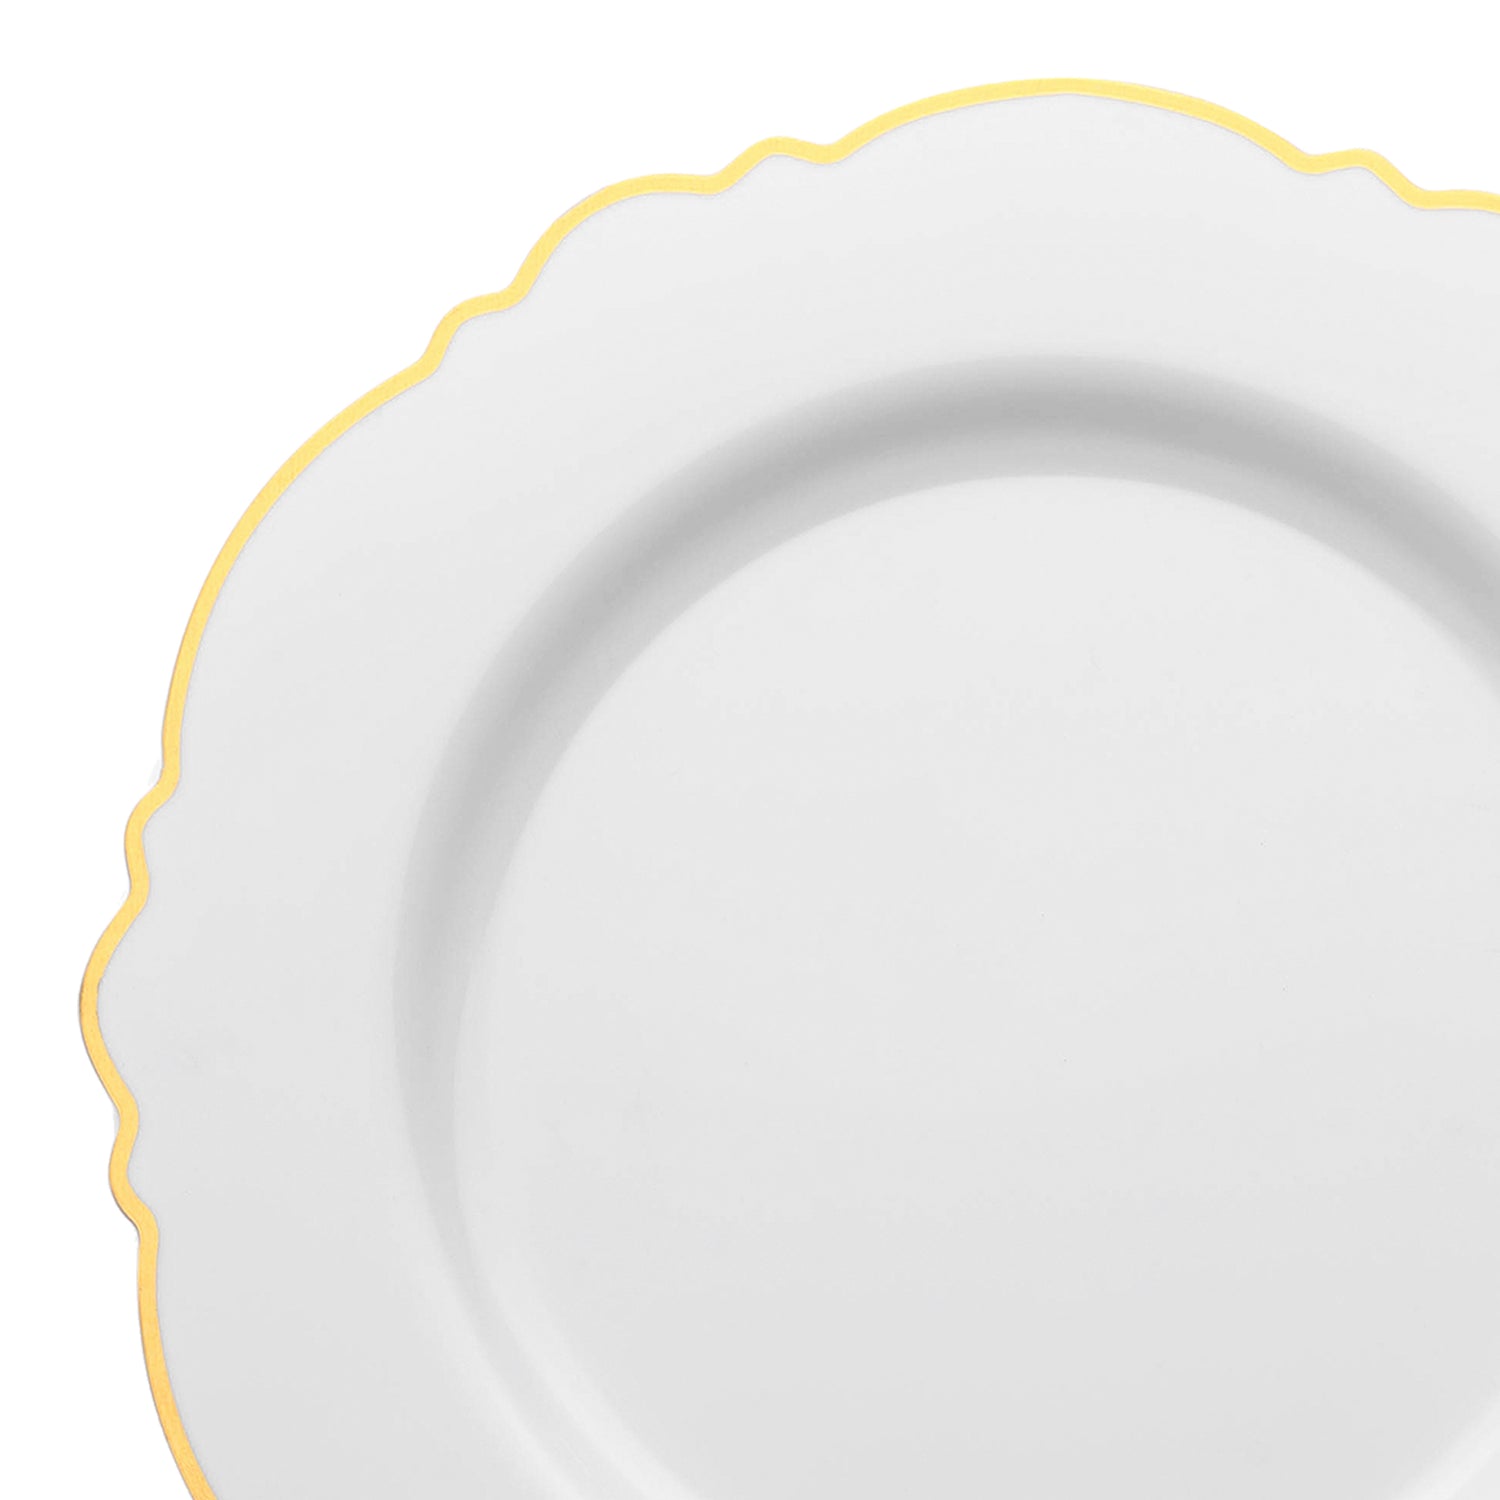 White with Gold Rim Round Blossom Disposable Plastic Appetizer/Salad Plates (7.5") | The Kaya Collection